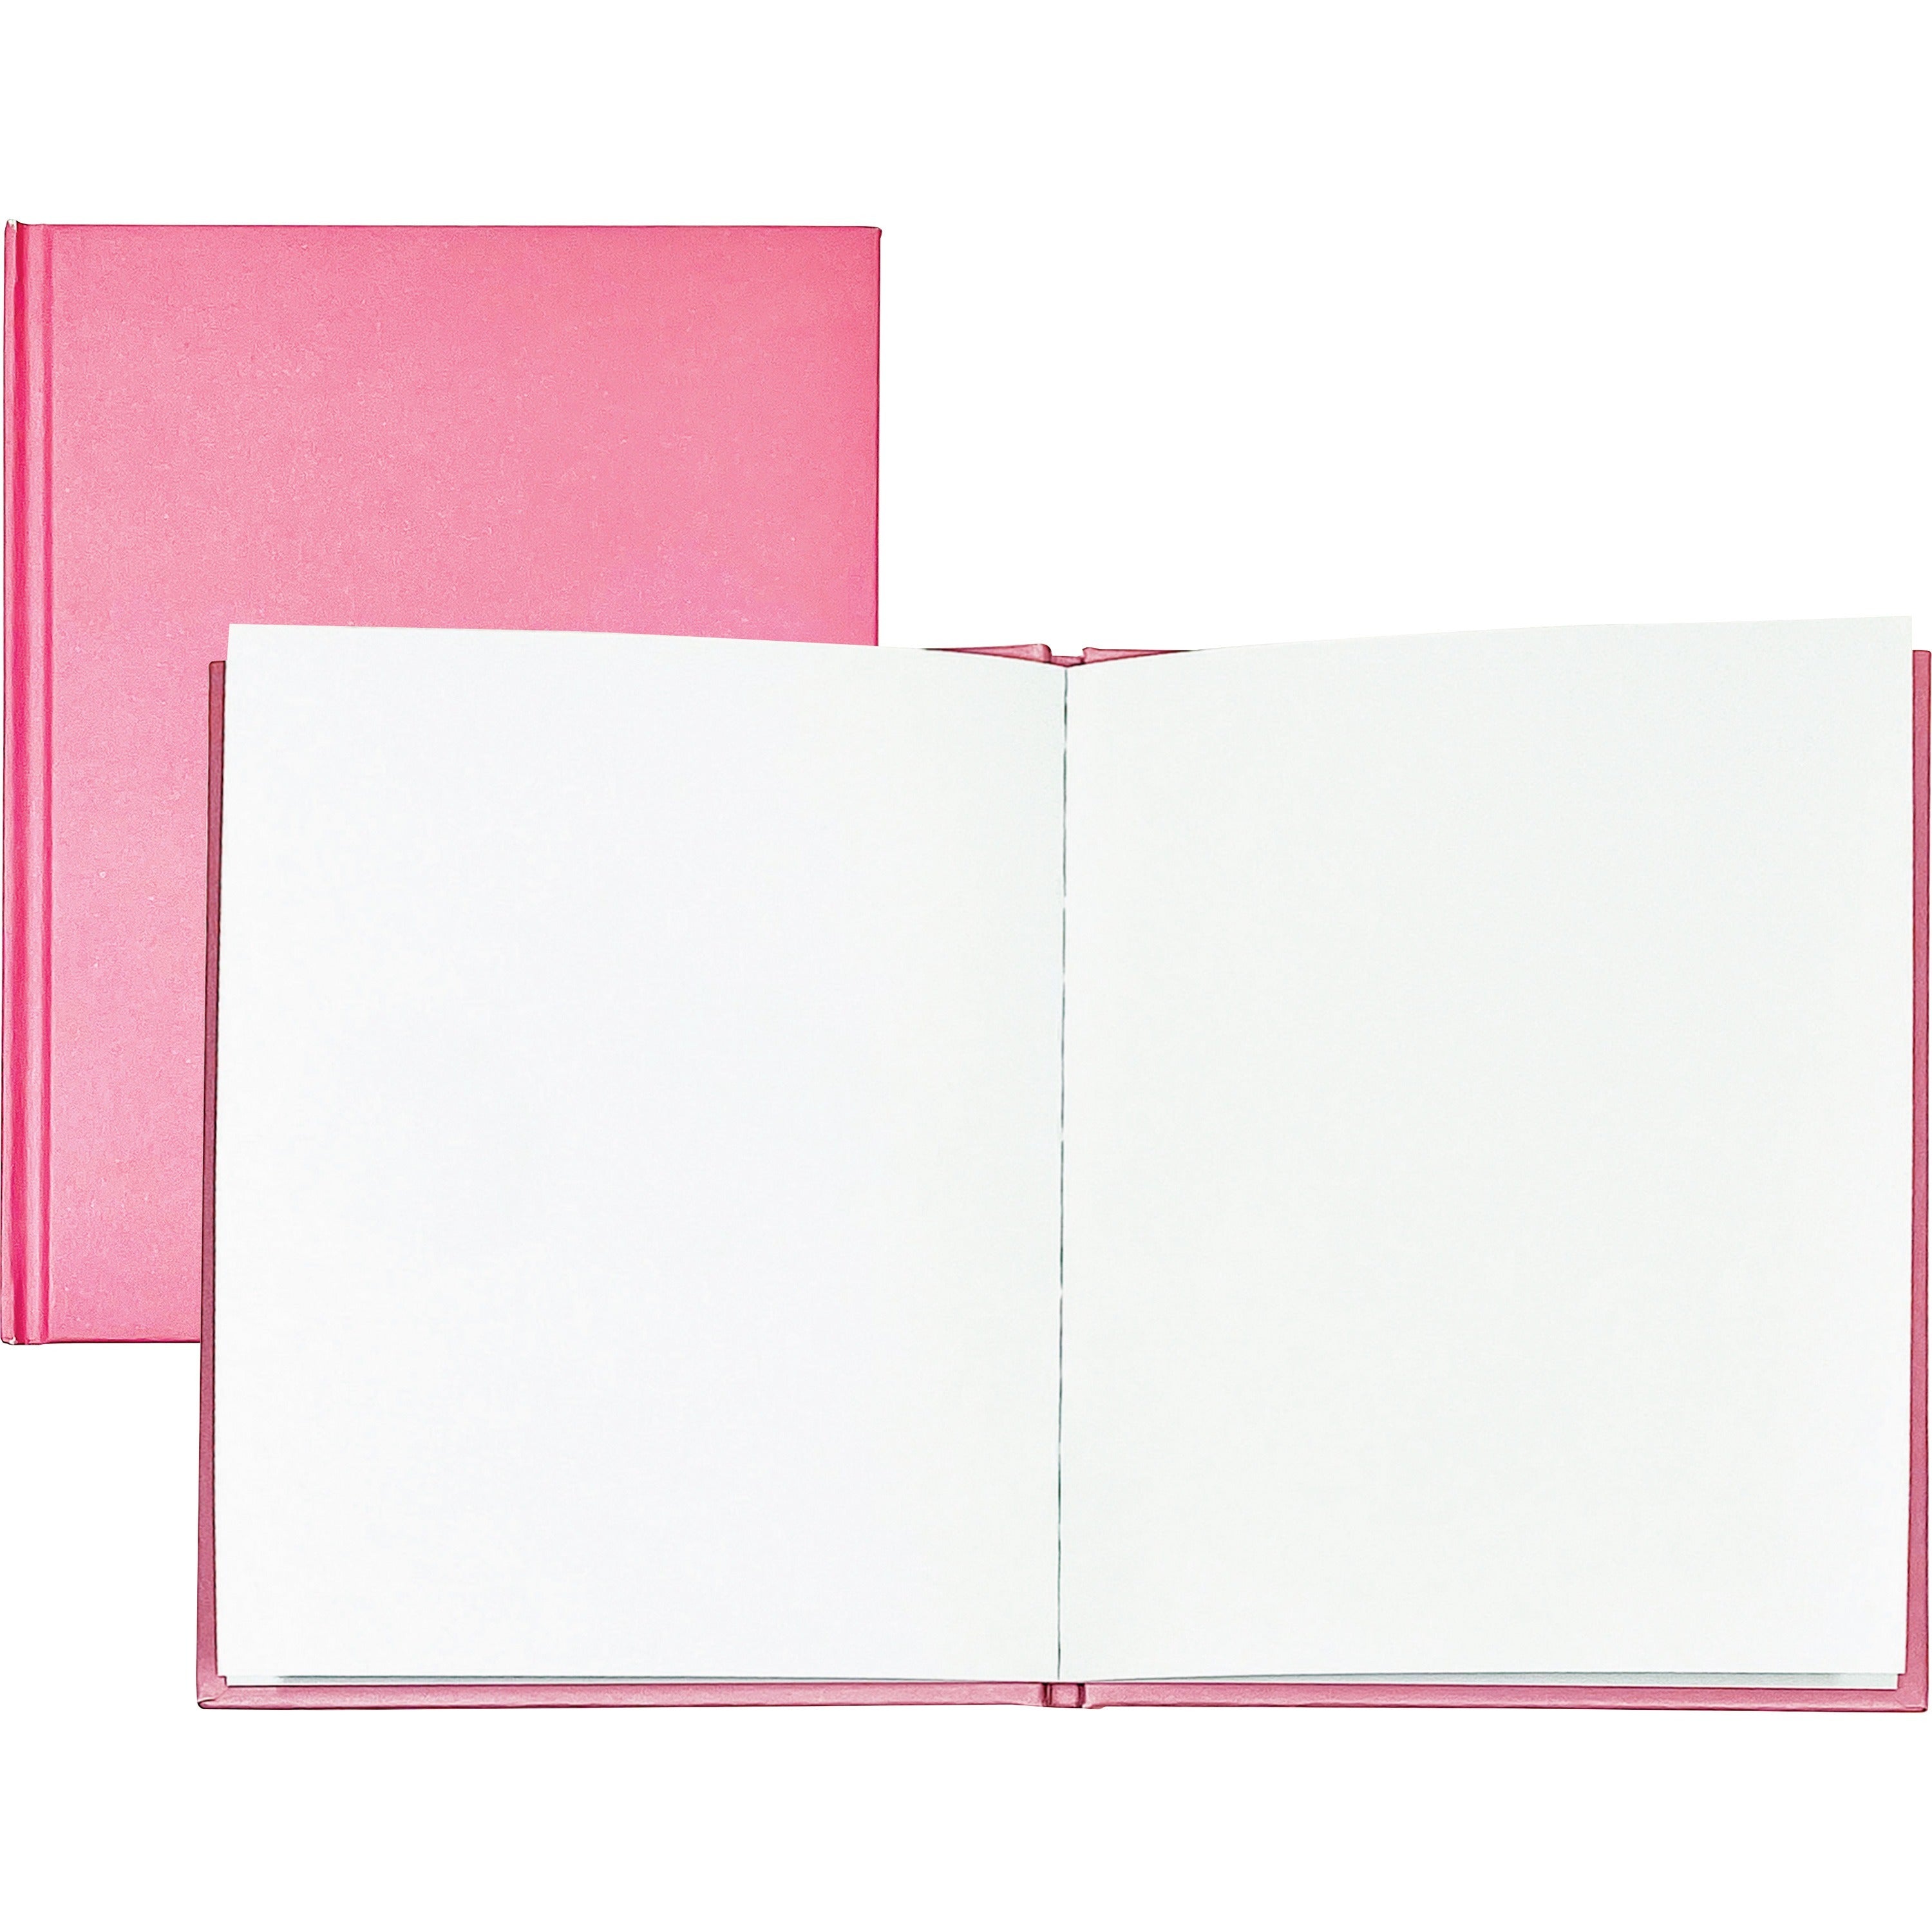 ashley-hardcover-blank-book-28-pages-6-x-8-pink-cover-hard-cover-durable-1-each_ash10713 - 1